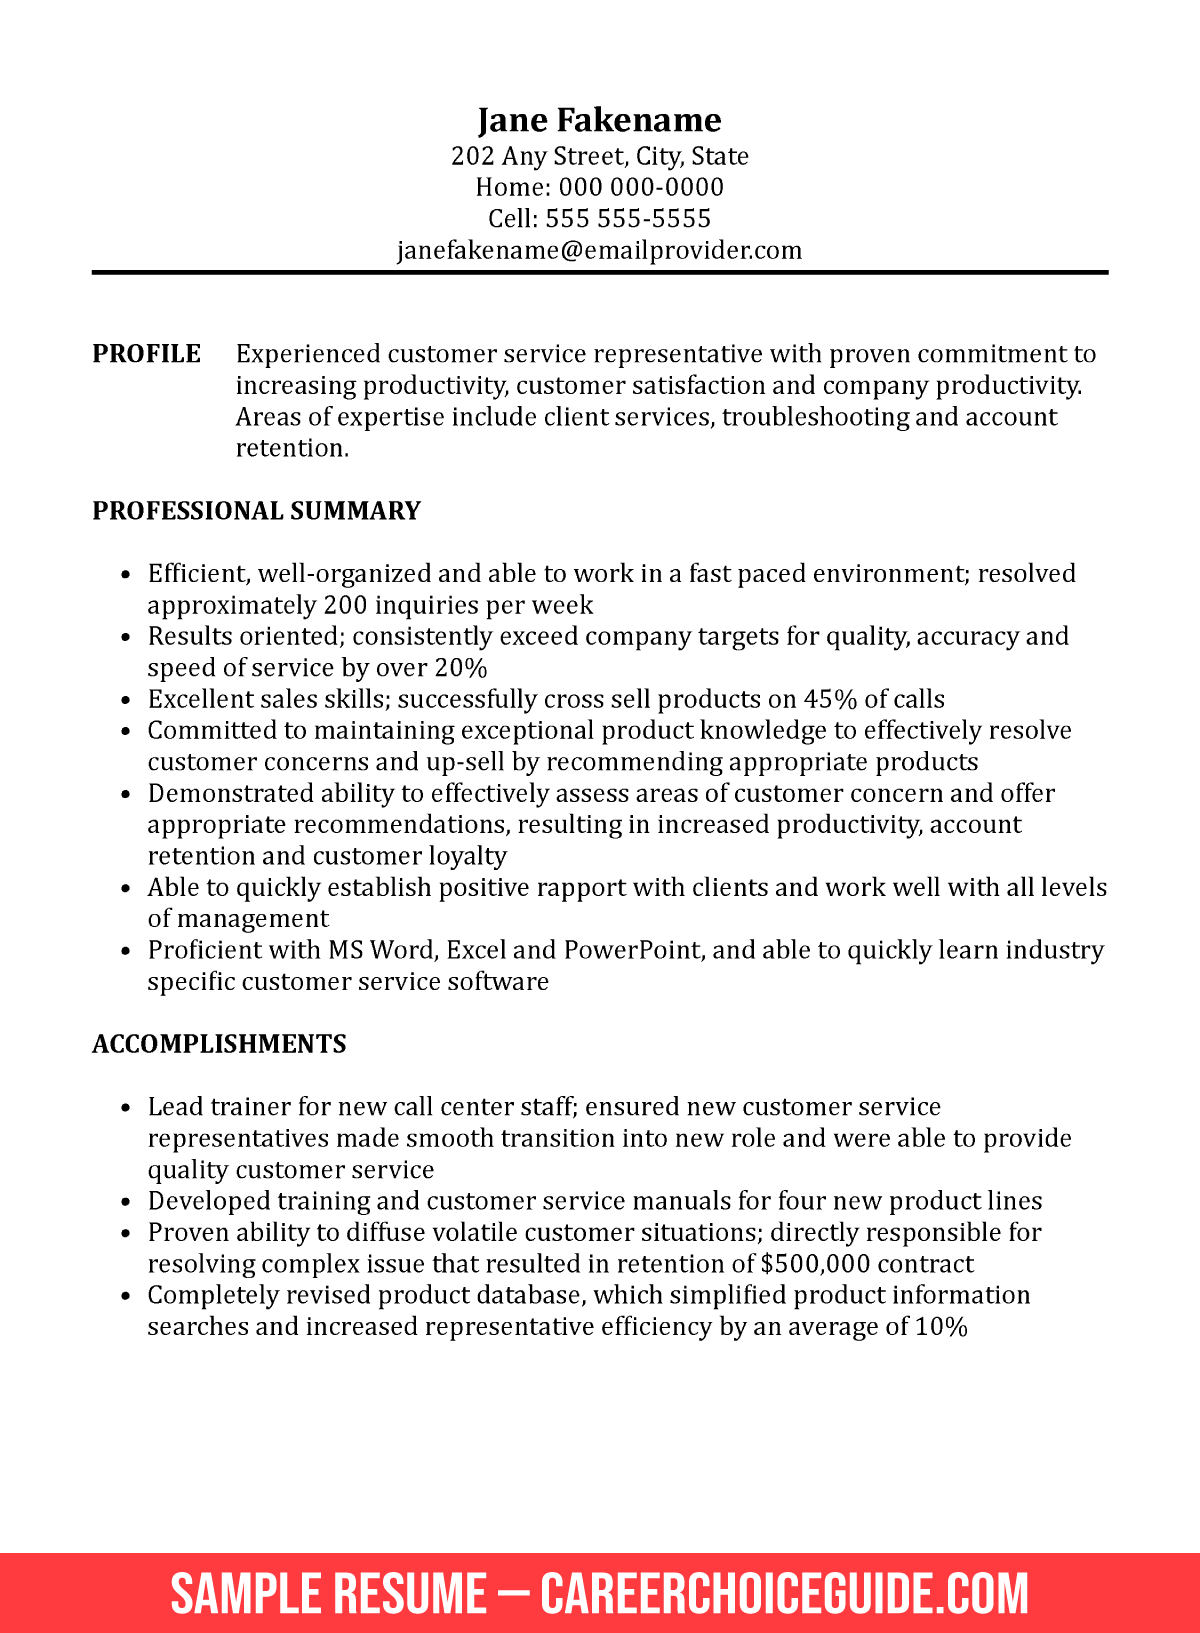 resume professional summary examples for customer service